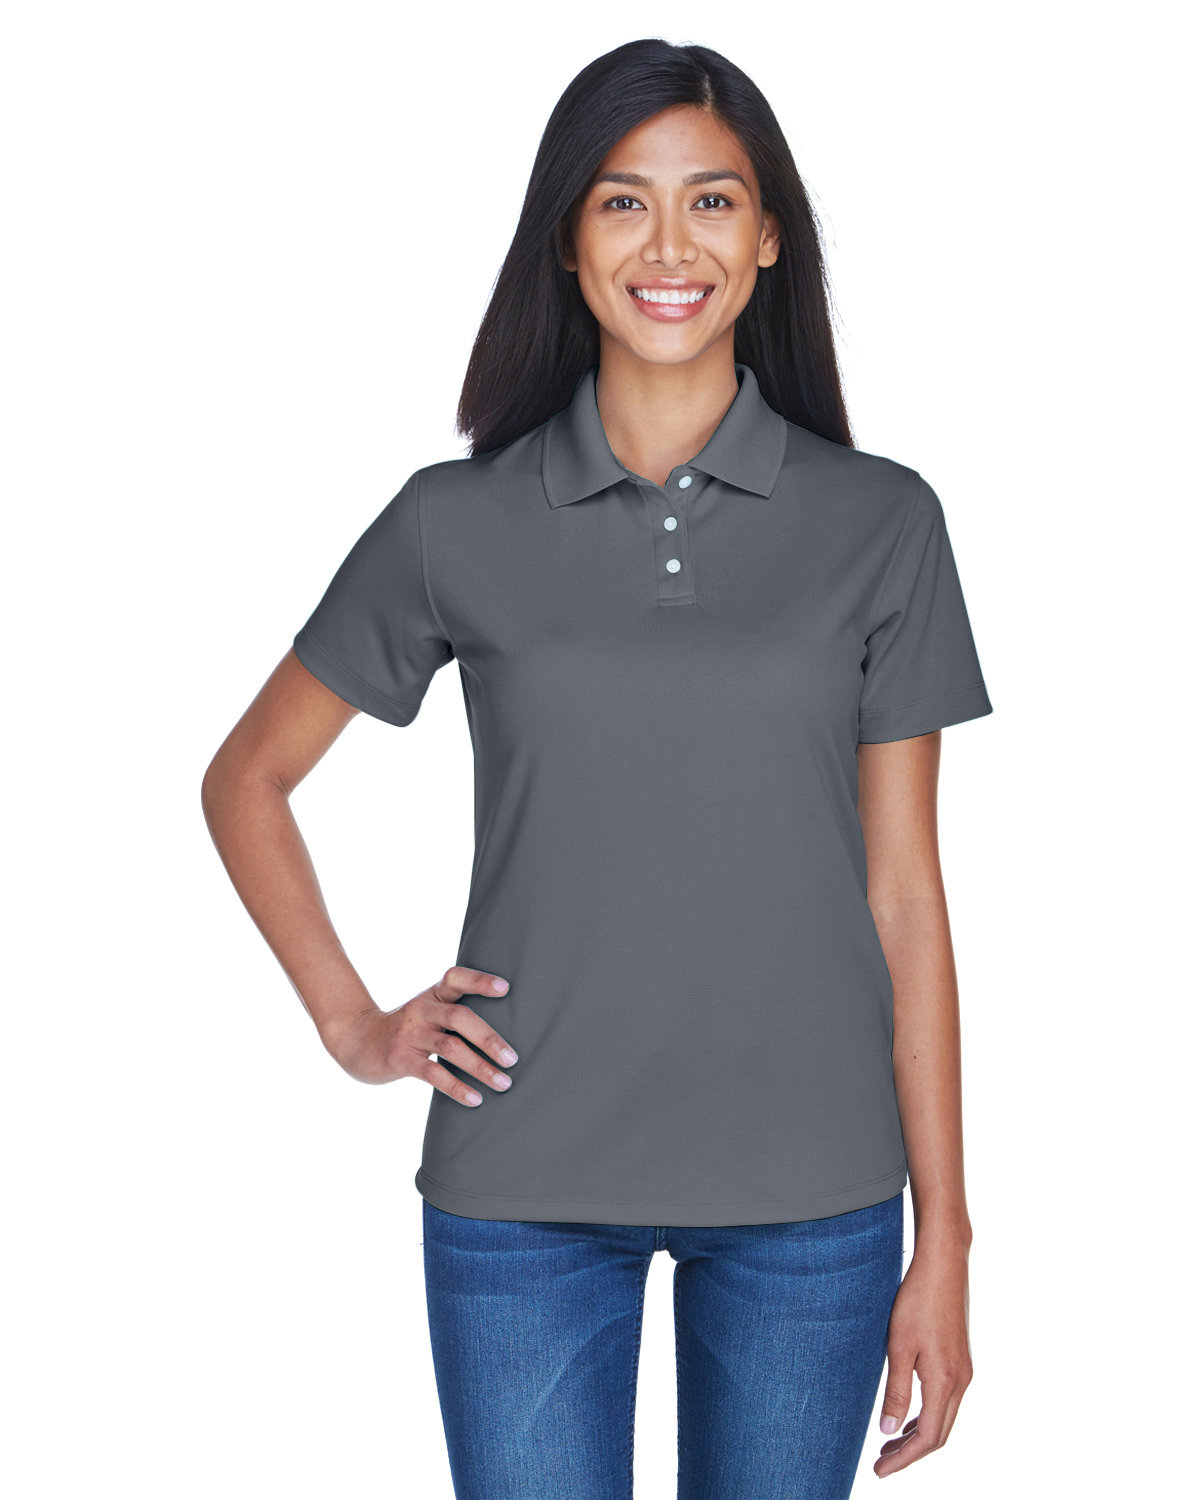 UltraClub Ladies' Cool & Dry Stain-Release Performance Polo CHARCOAL 